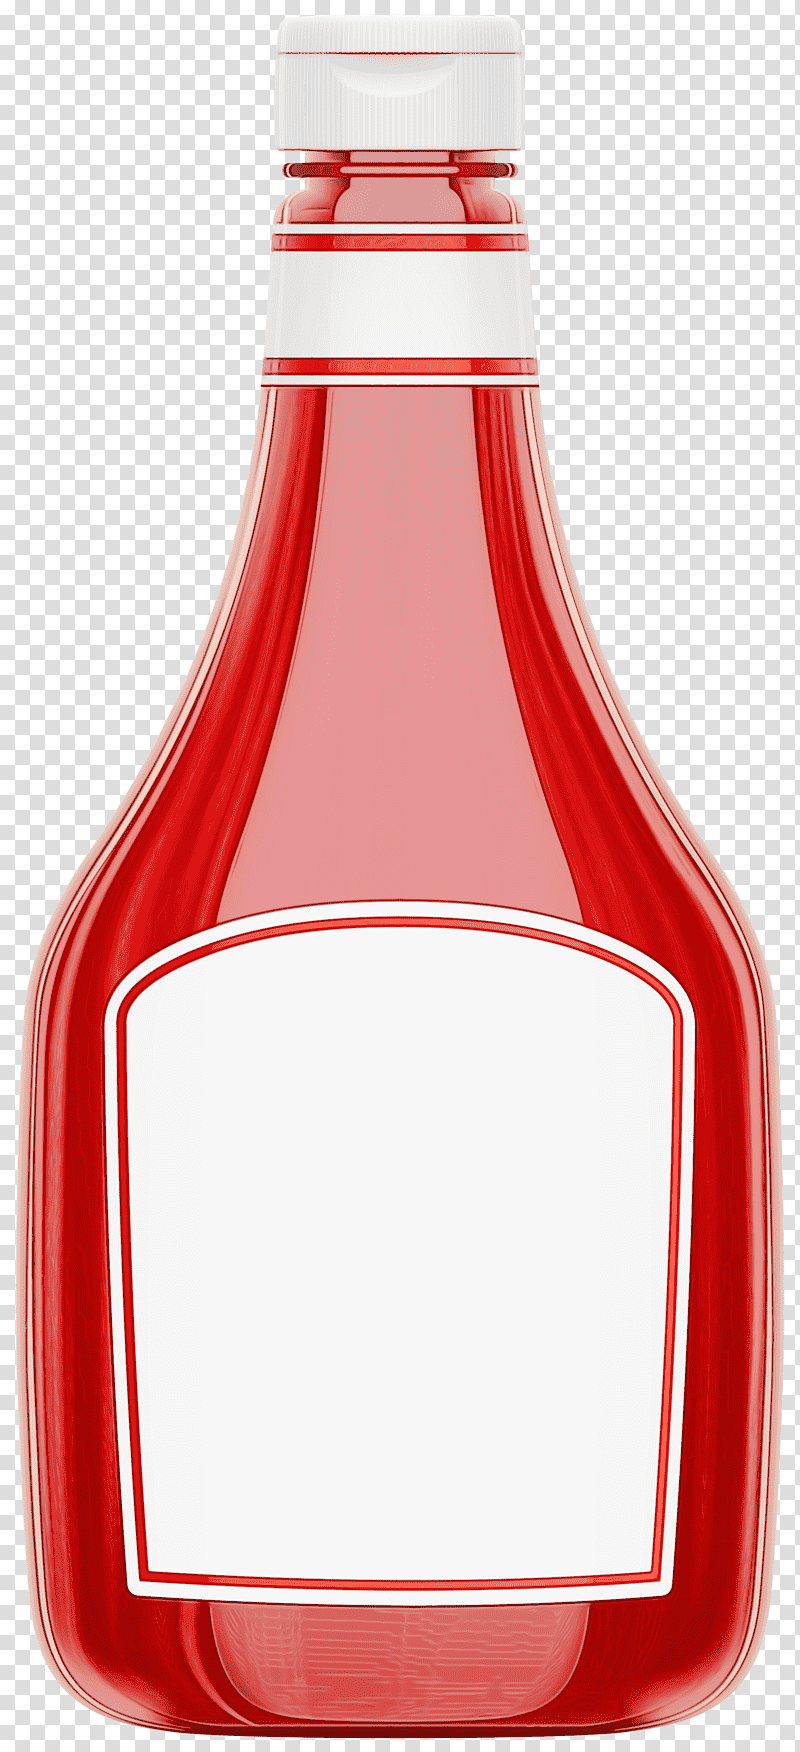 Tomato, Watercolor, Paint, Wet Ink, Ketchup, Bottle, Heinz transparent background PNG clipart